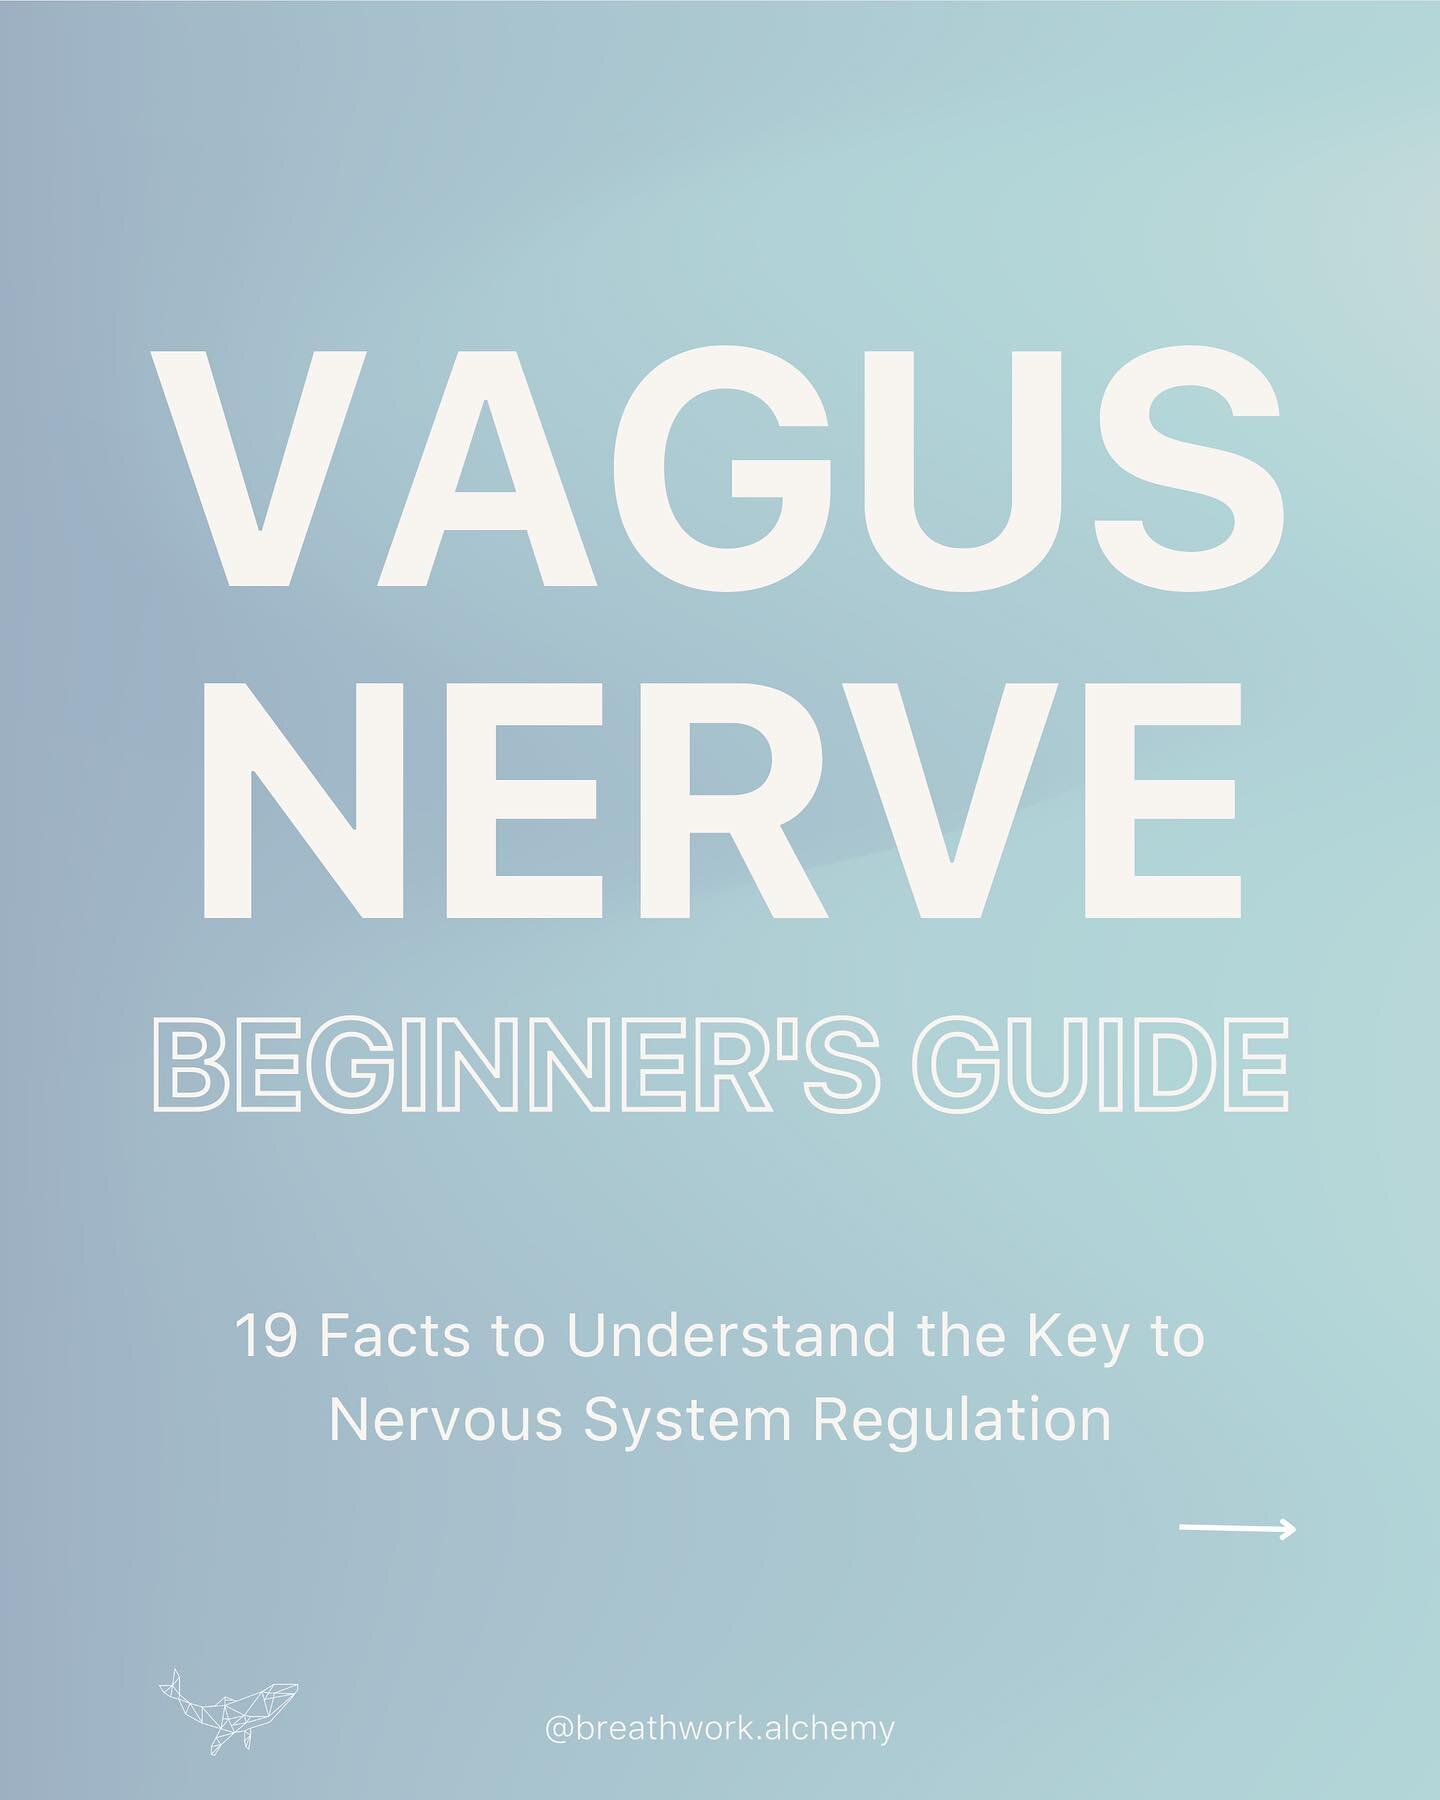 The vagus nerve is probably the most popular nerve on social media. 🤪

I remember hearing about it years ago from a befriended naturopath who was helping me heal my SIBO (small intestinal bacterial overgrowth).

She kept telling me to do humming med